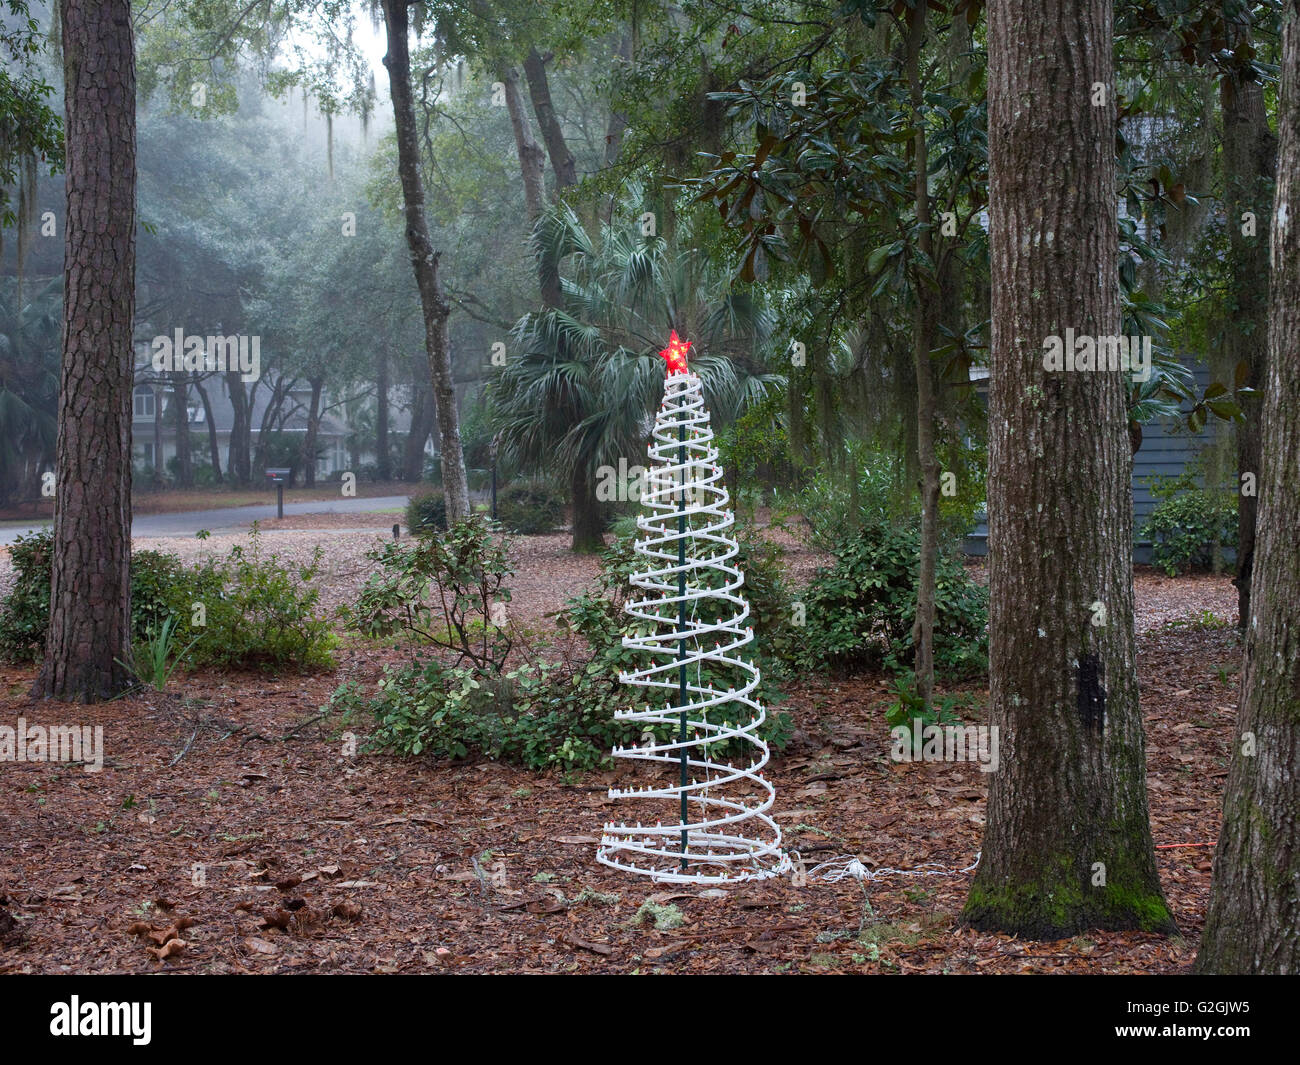 artificial Christmas tree in southern suburb of South Carolina Stock Photo